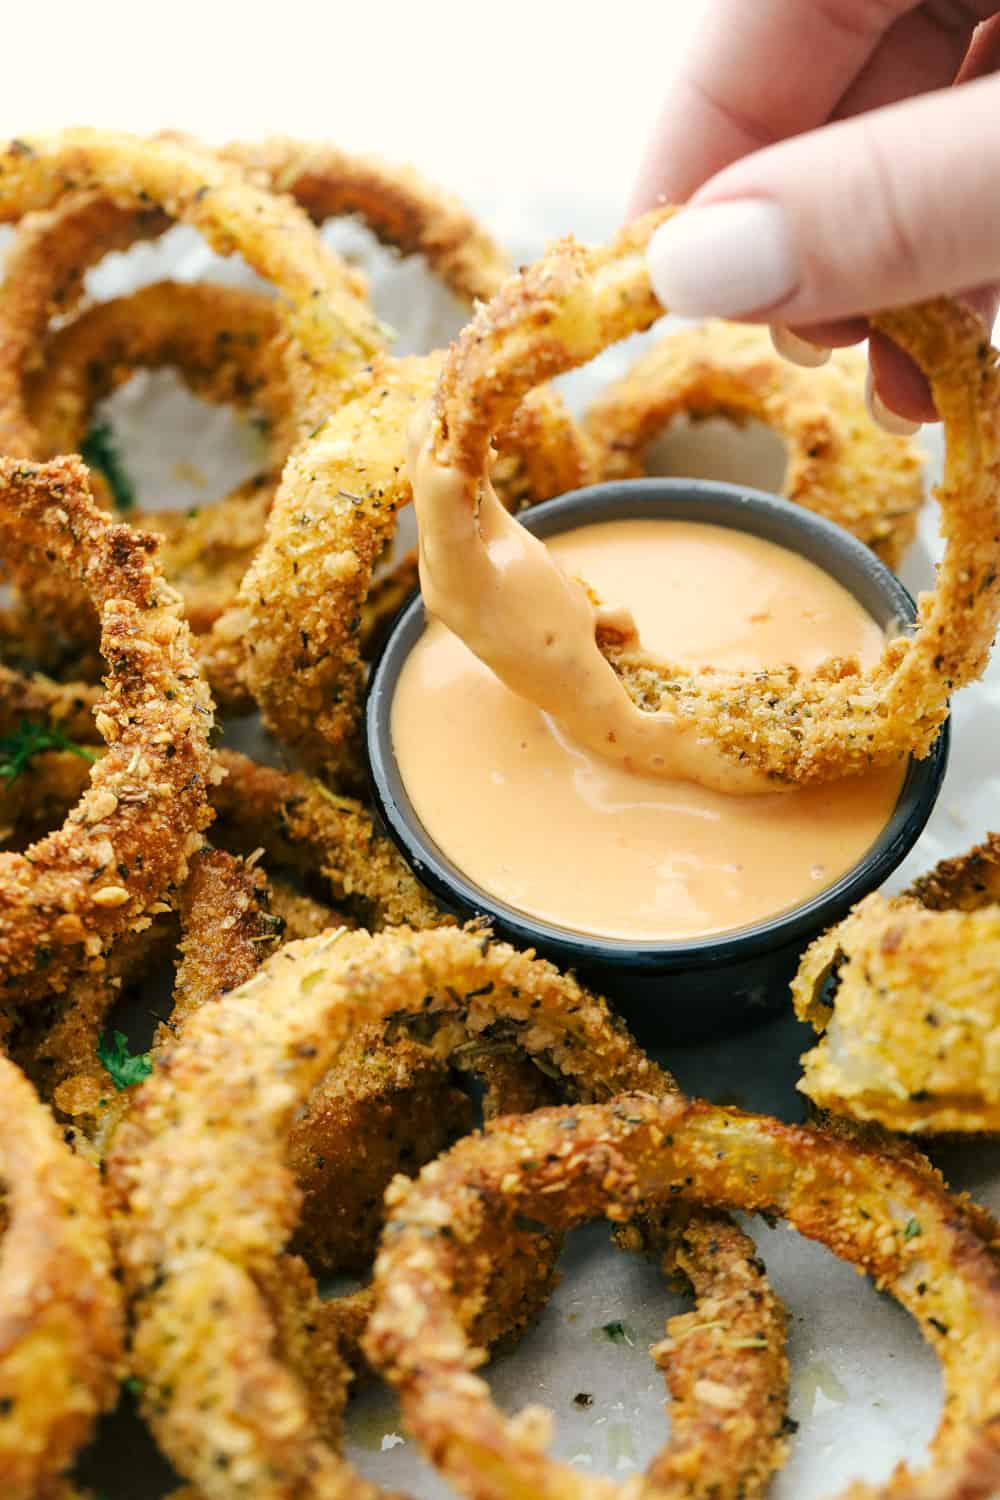 Dipping onion rings in dipping sauce for eating. 